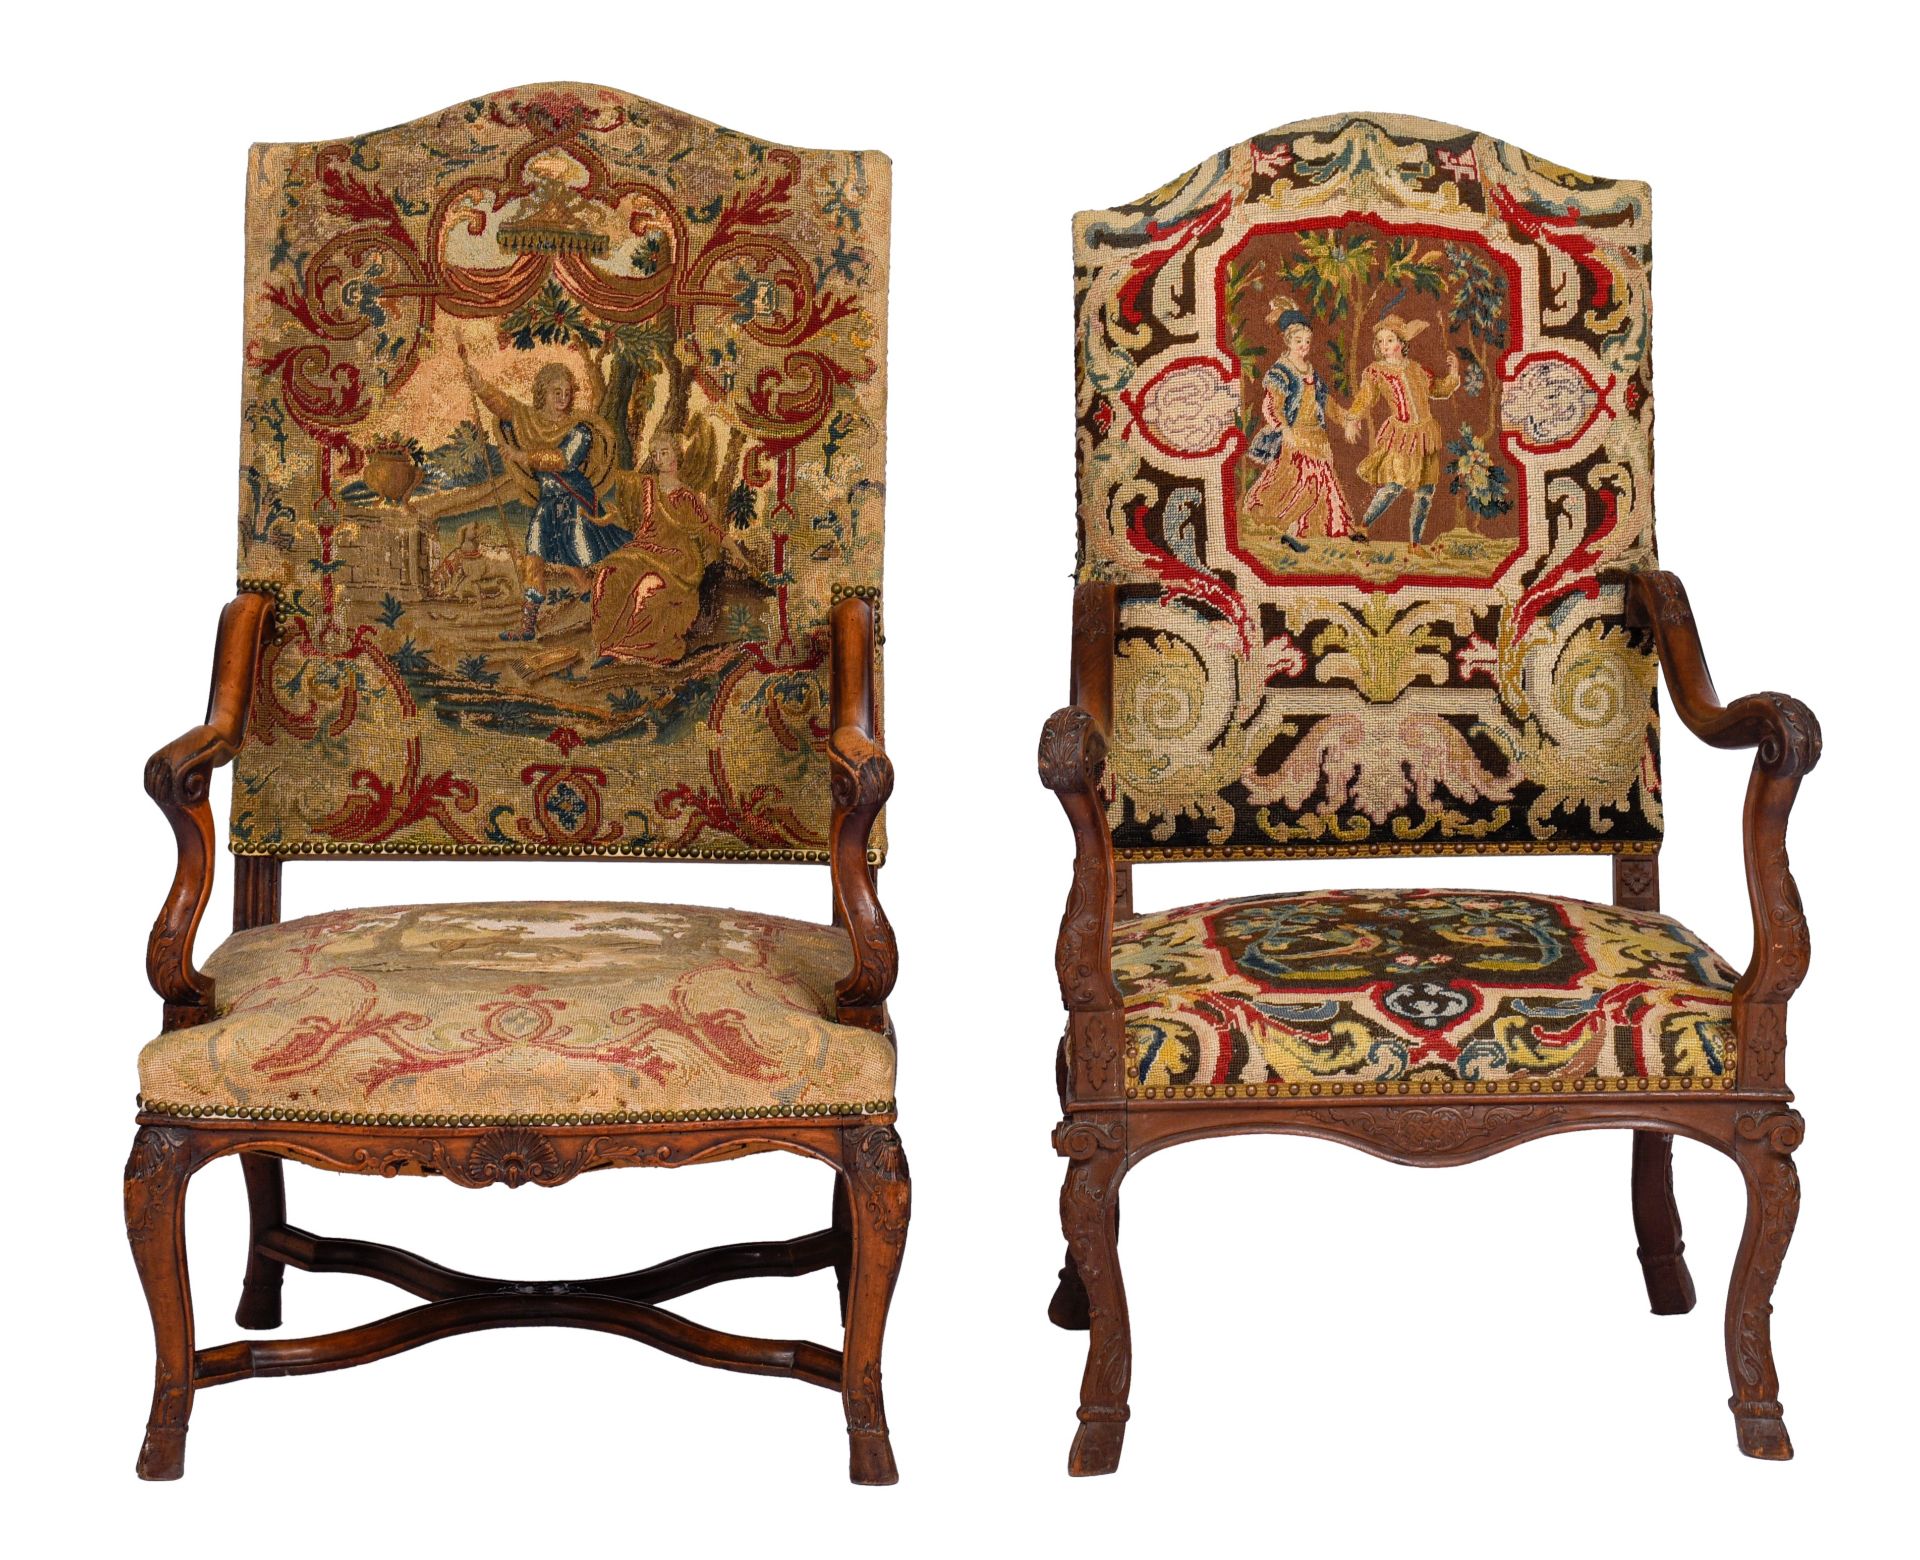 Two carved walnut Régence armchairs, H 120 - W 71 - H 116 - W 70 cm - Image 2 of 24